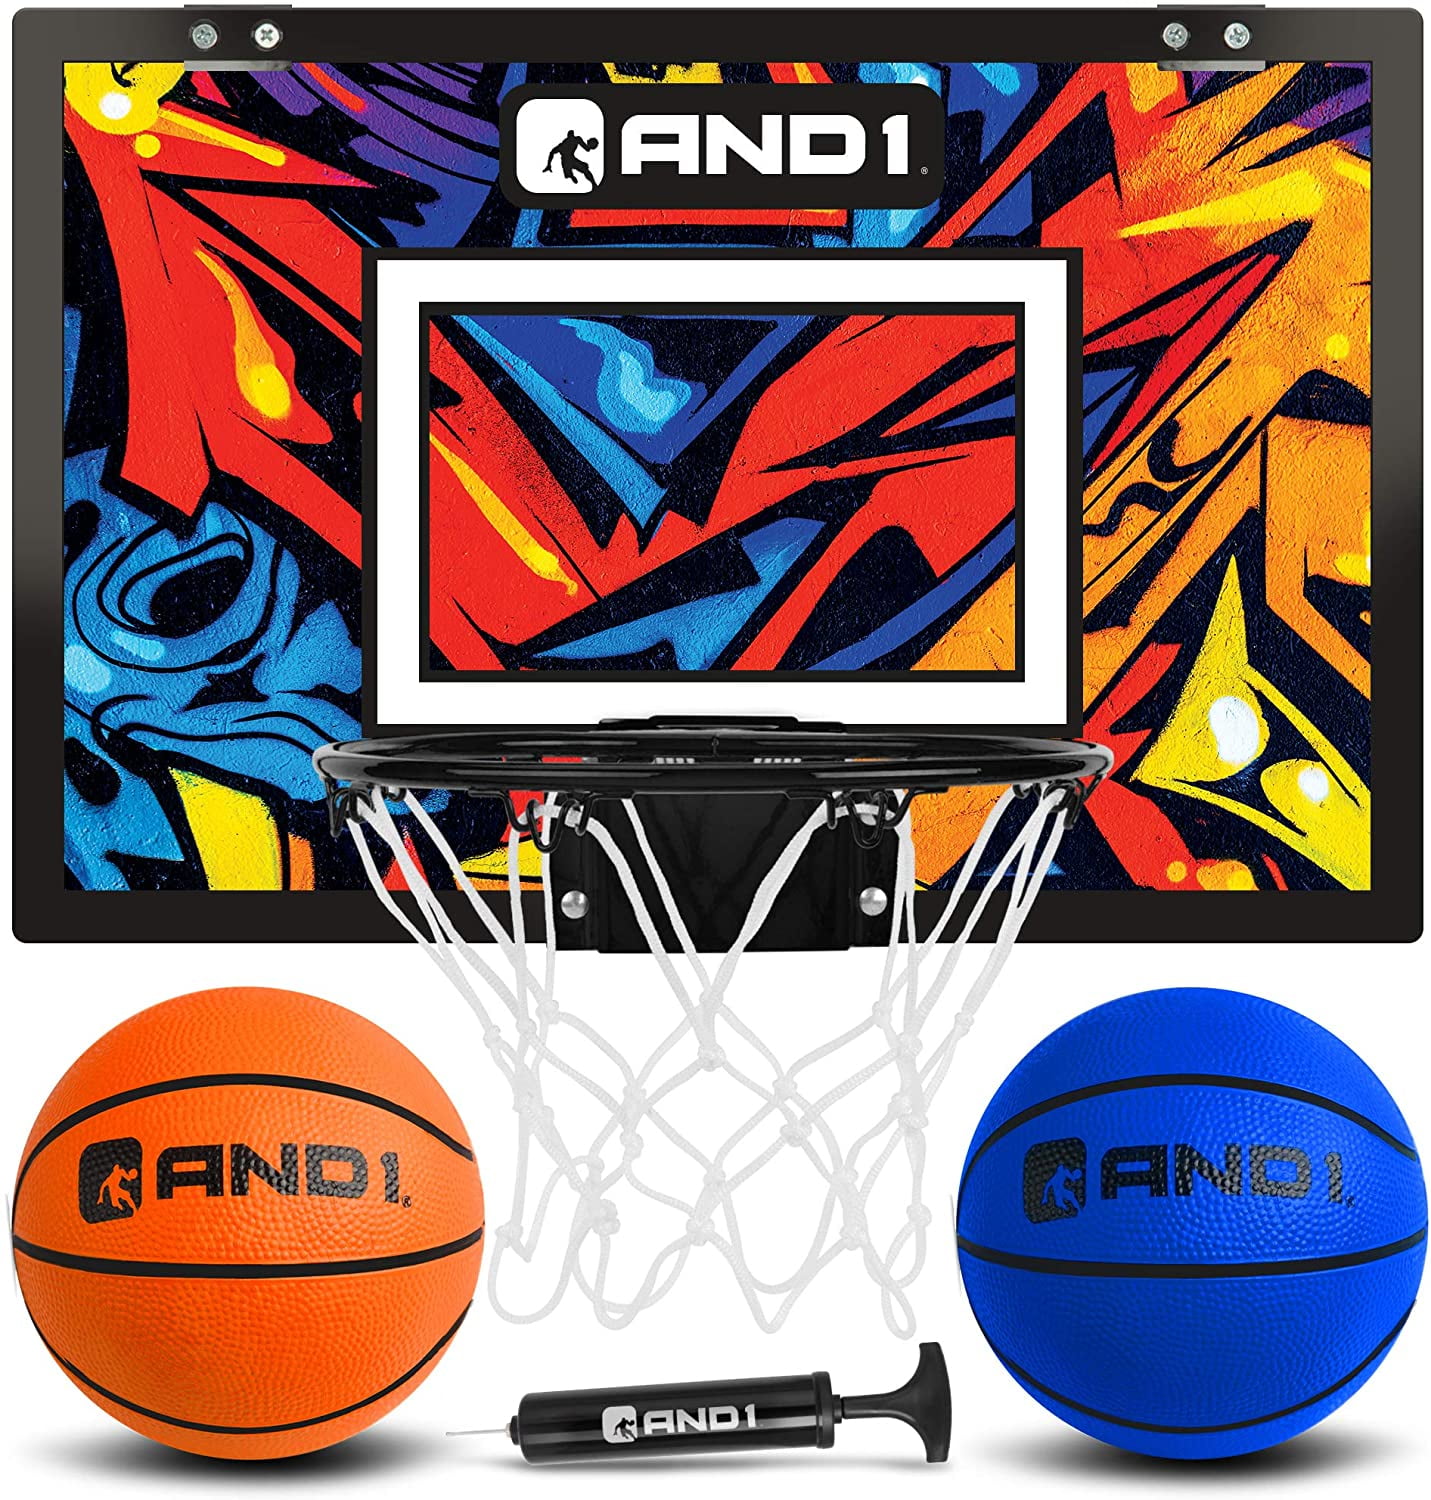 Details about   AND1 Mini Basketball Set for Kids Deflated w/ Pump Included 3 Pack of Premi : 